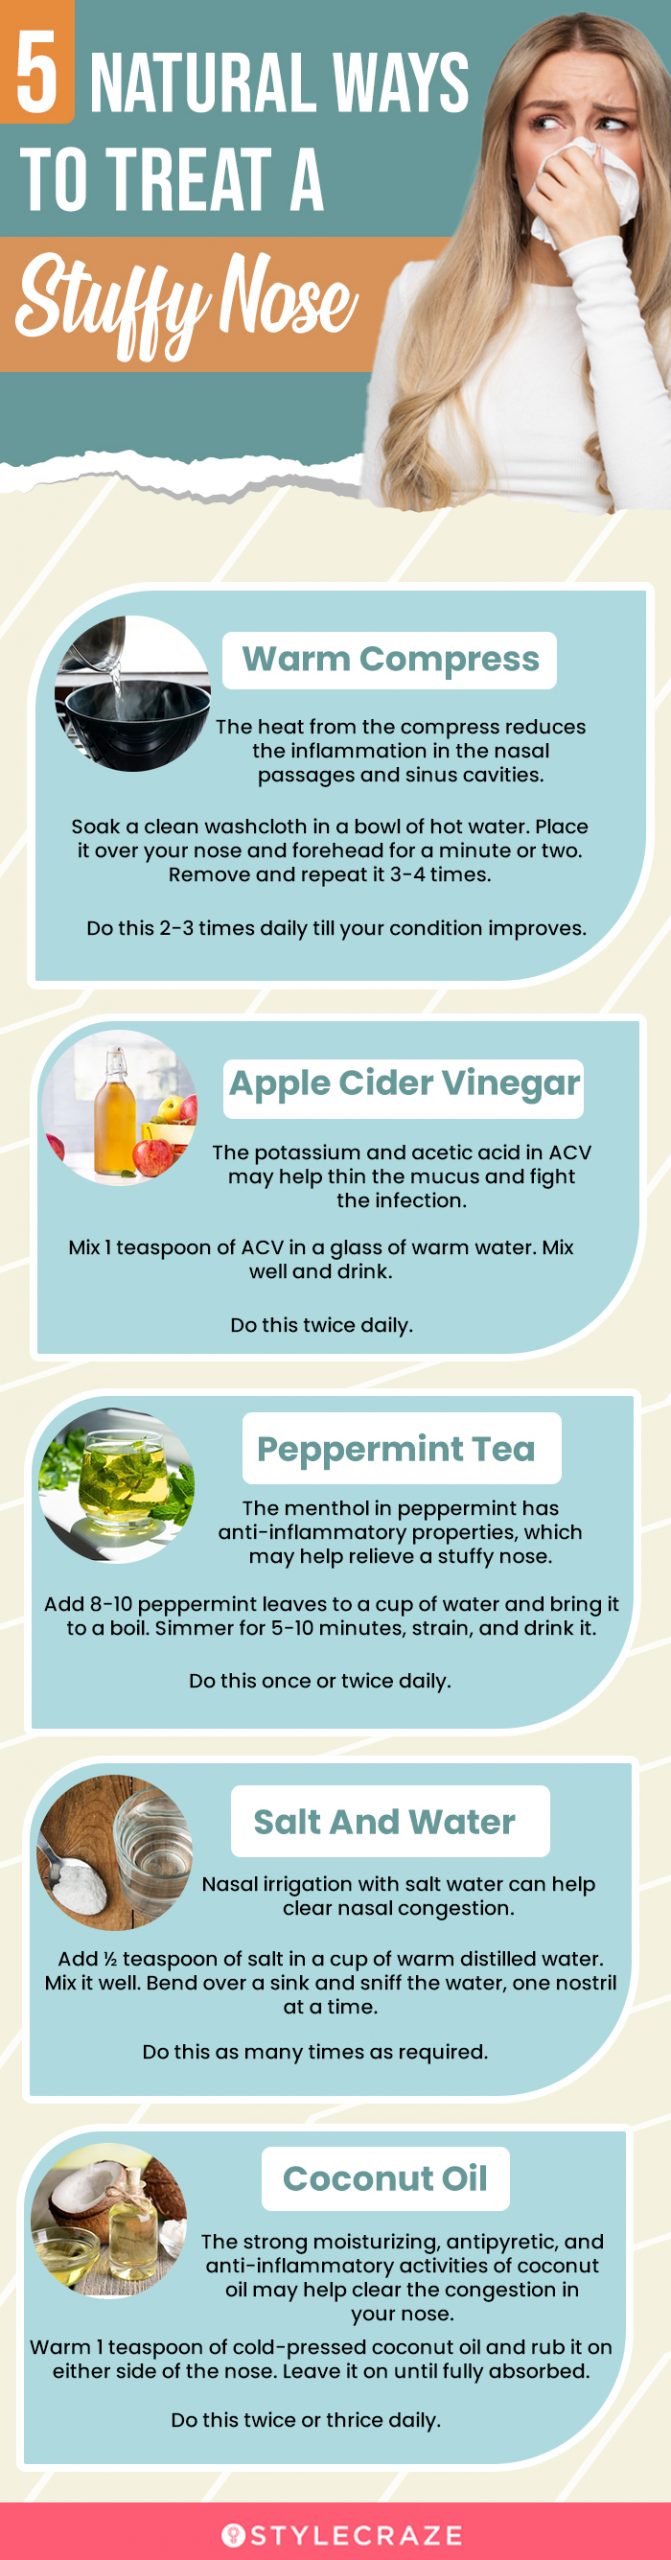 5 natural ways to treat a stuffy nose (infographic)